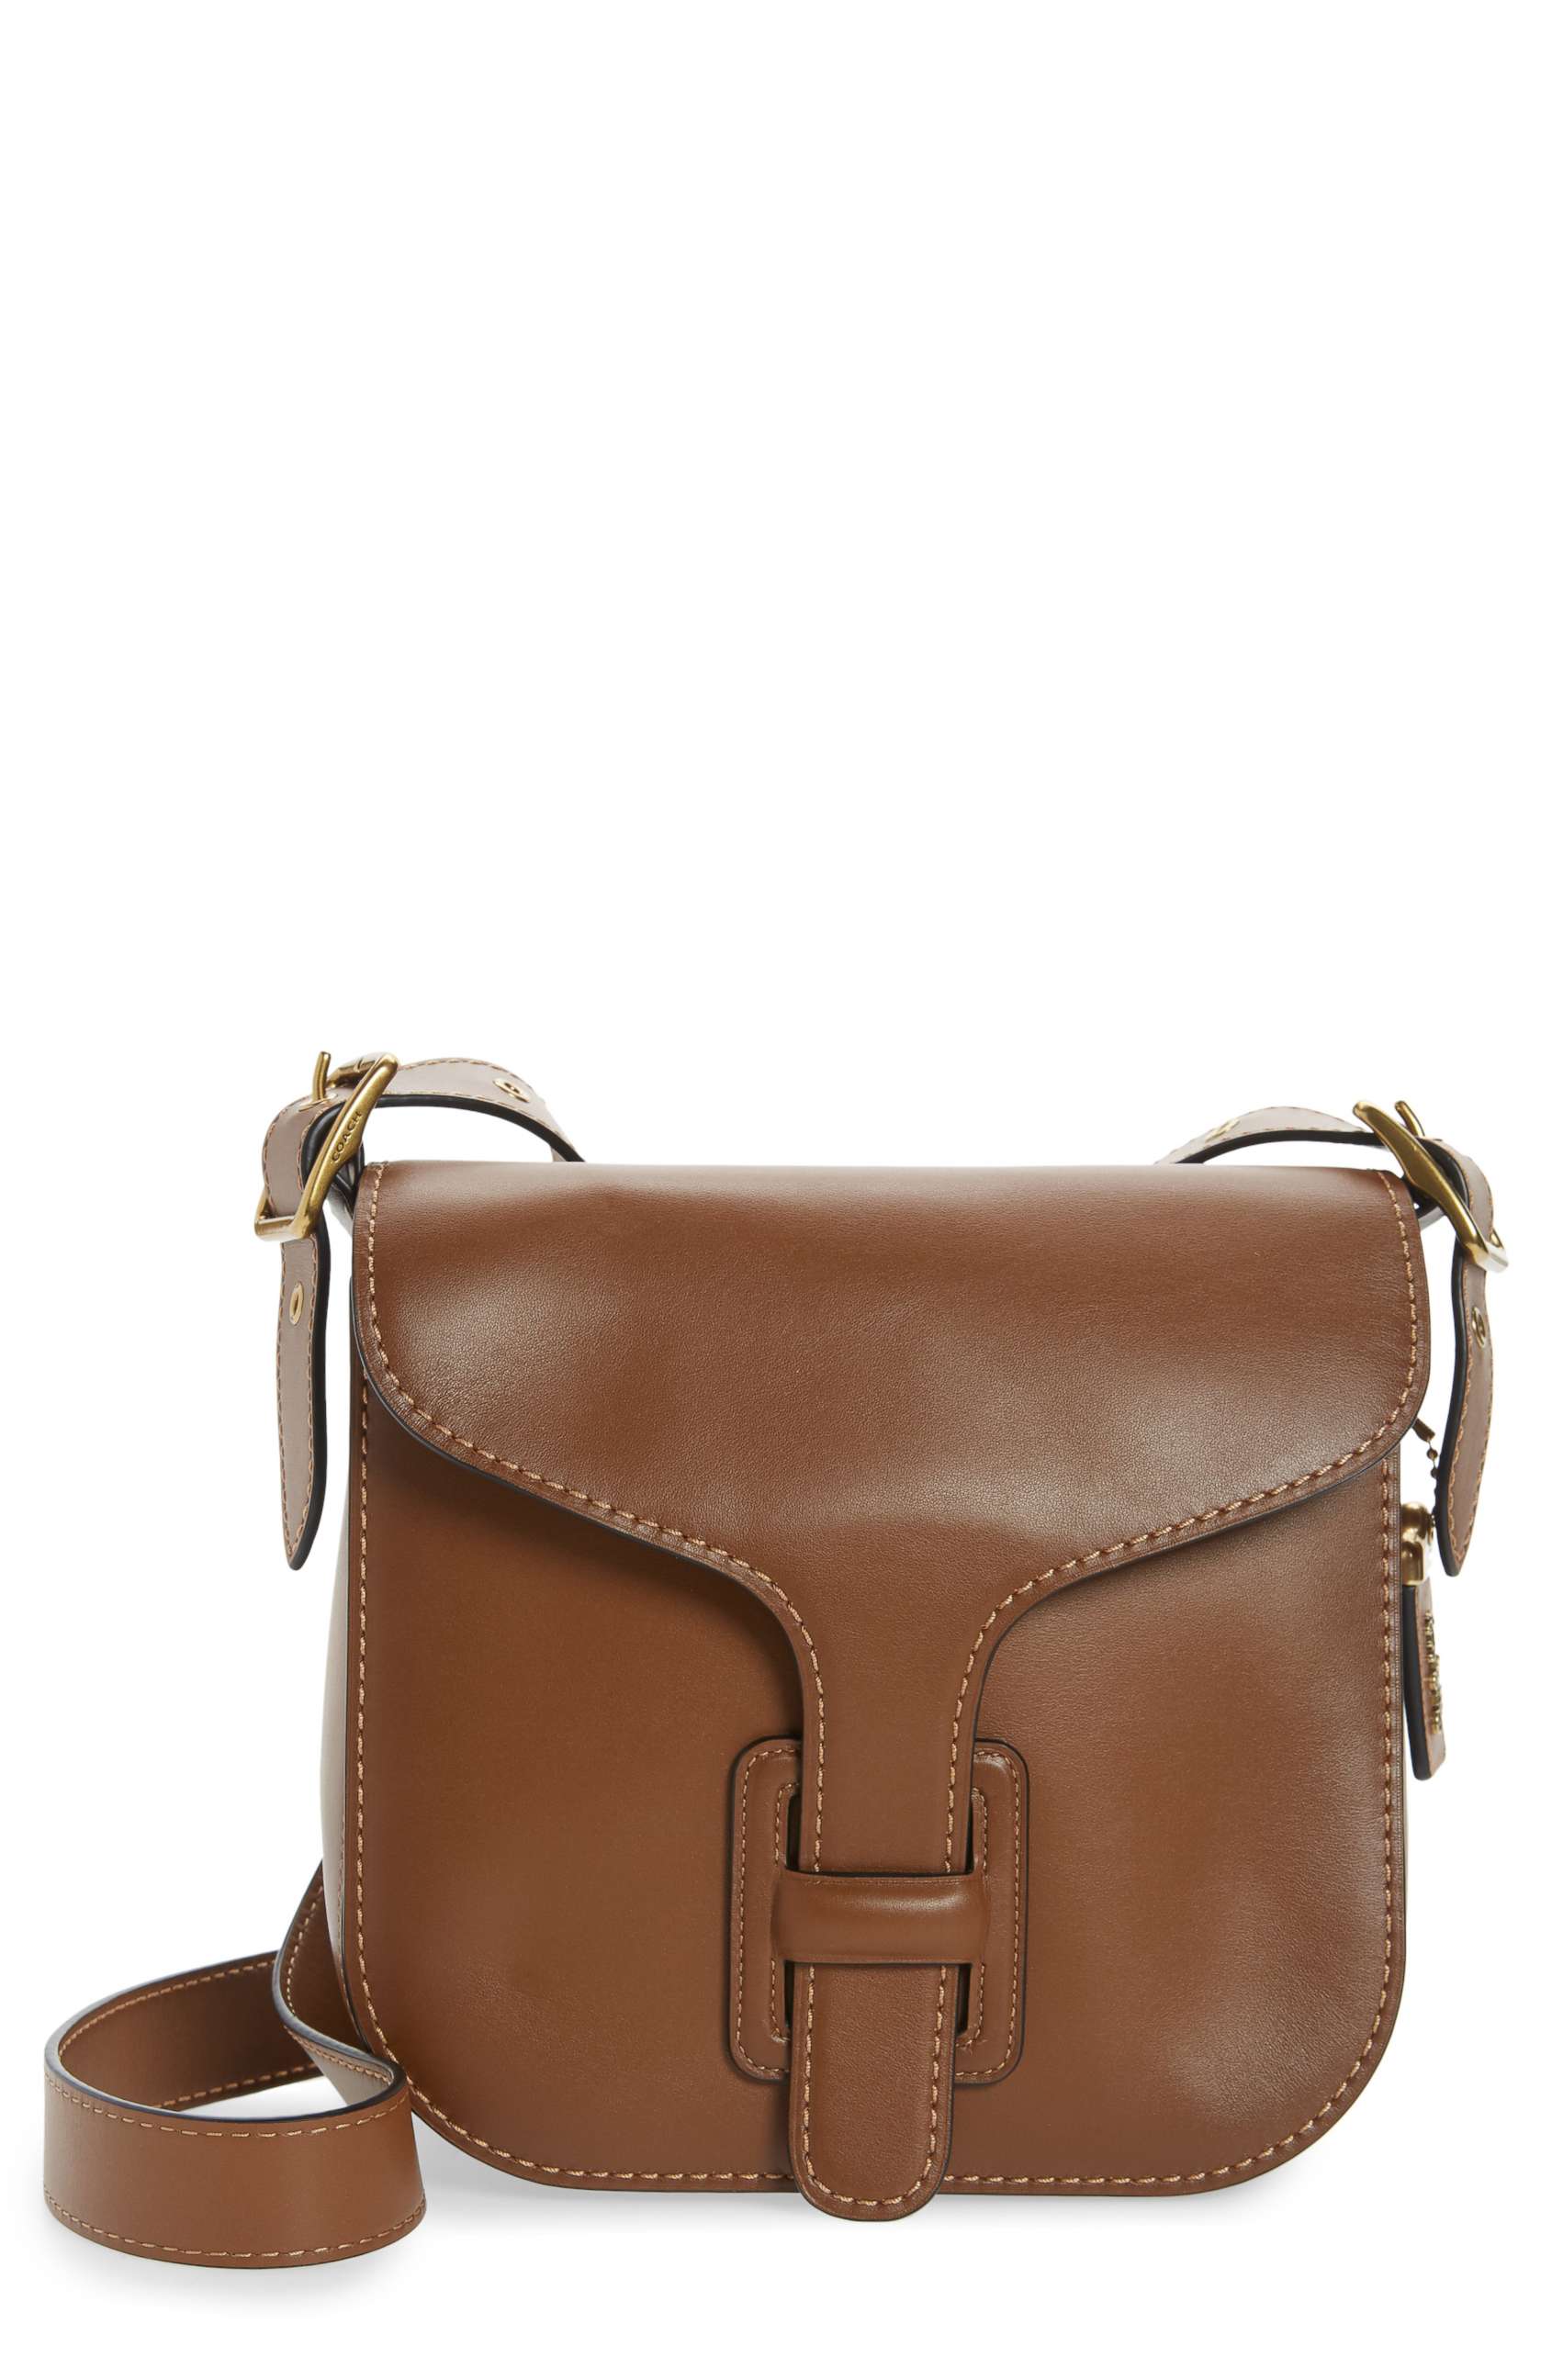 PHOTO: This Coach Leather Crossbody bag is is featured in Nordstrom's 2020 Anniversary Sale.